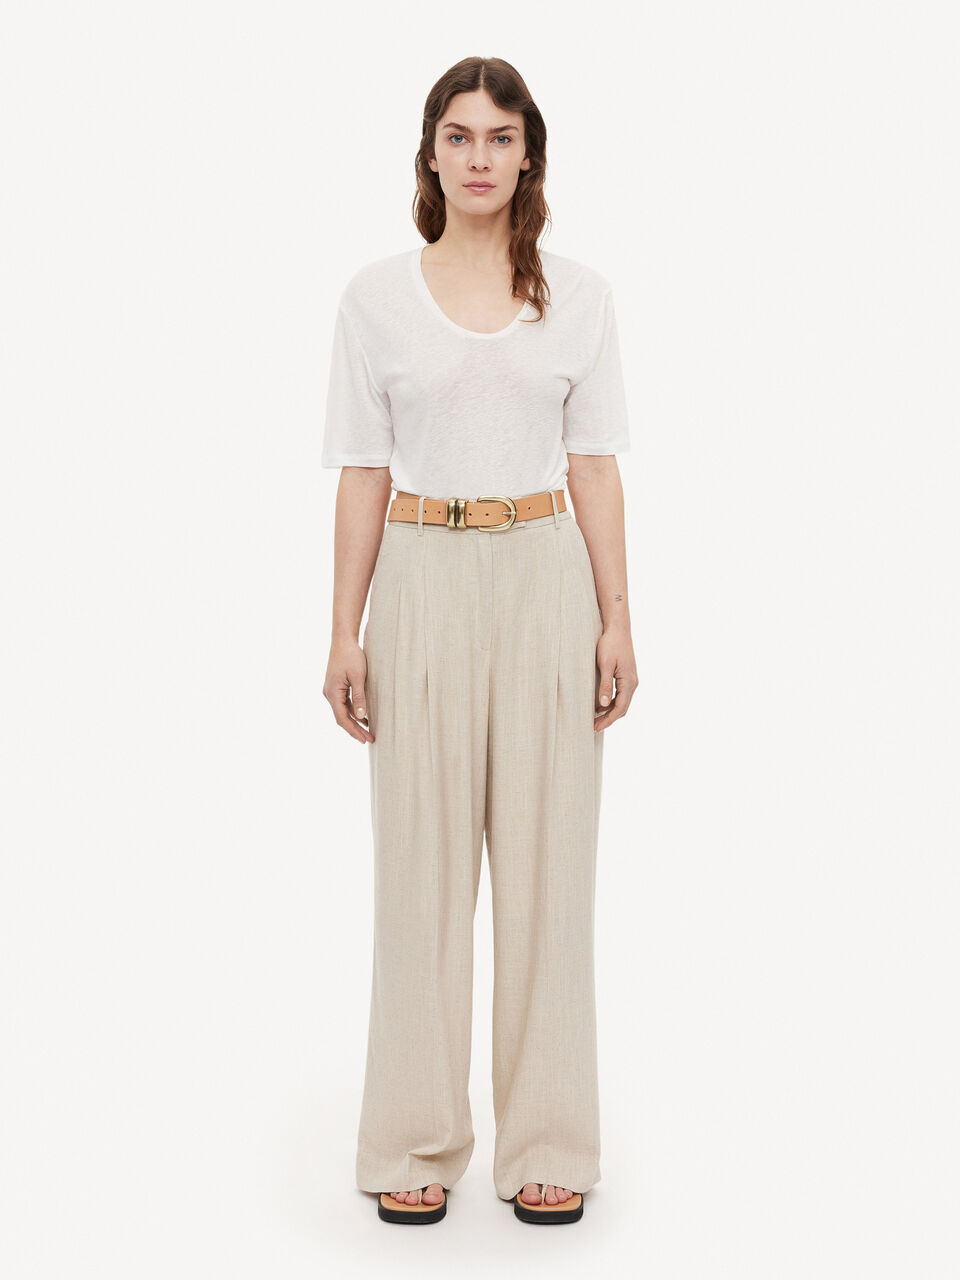 Cymbaria high-waisted trousers - Buy Winter sale online | Trainingshosen